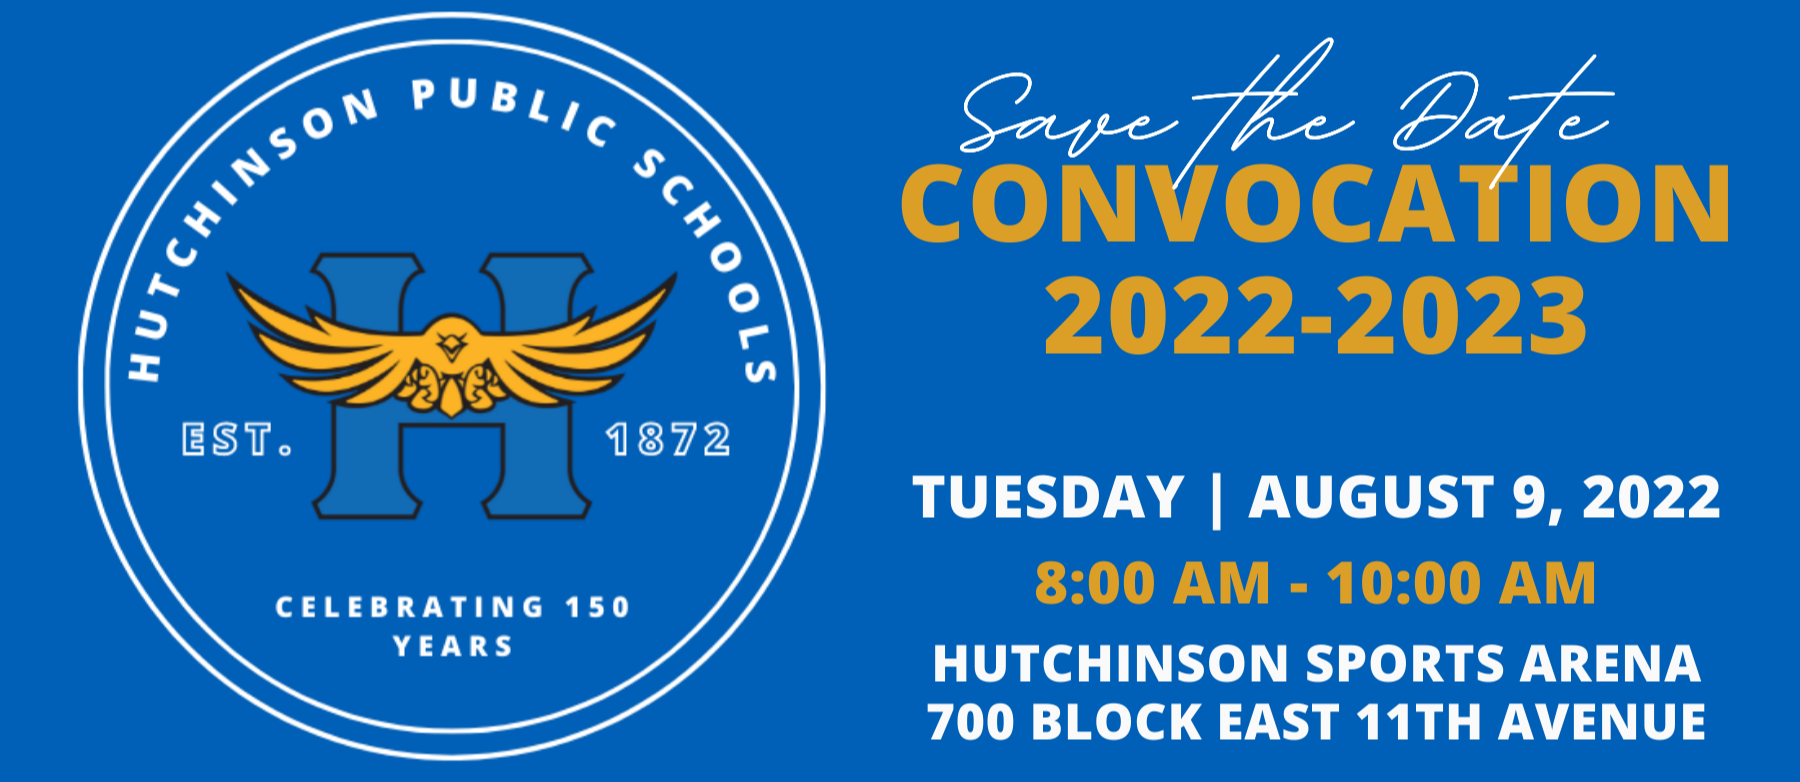 convocation 22 save the date